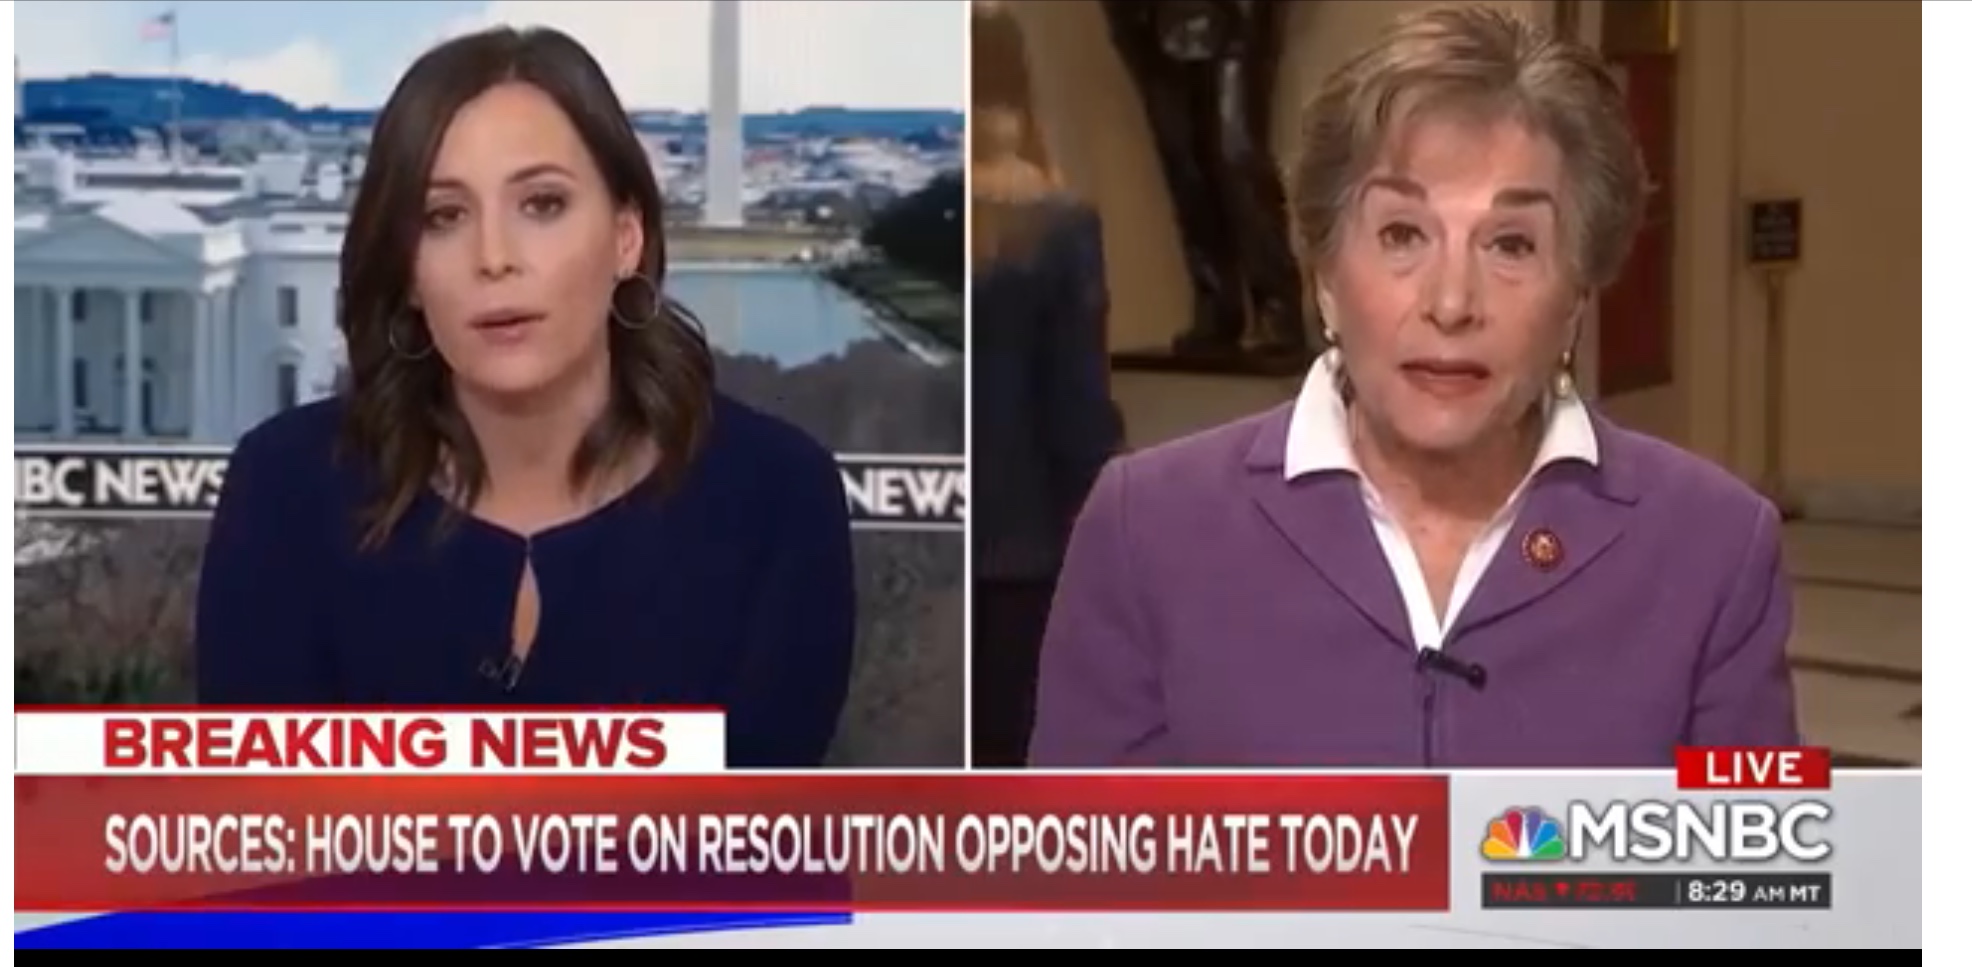 Rep. Jan Schakowsky speaks to MSNBC about Rep. Ilhan Omar’s comments.